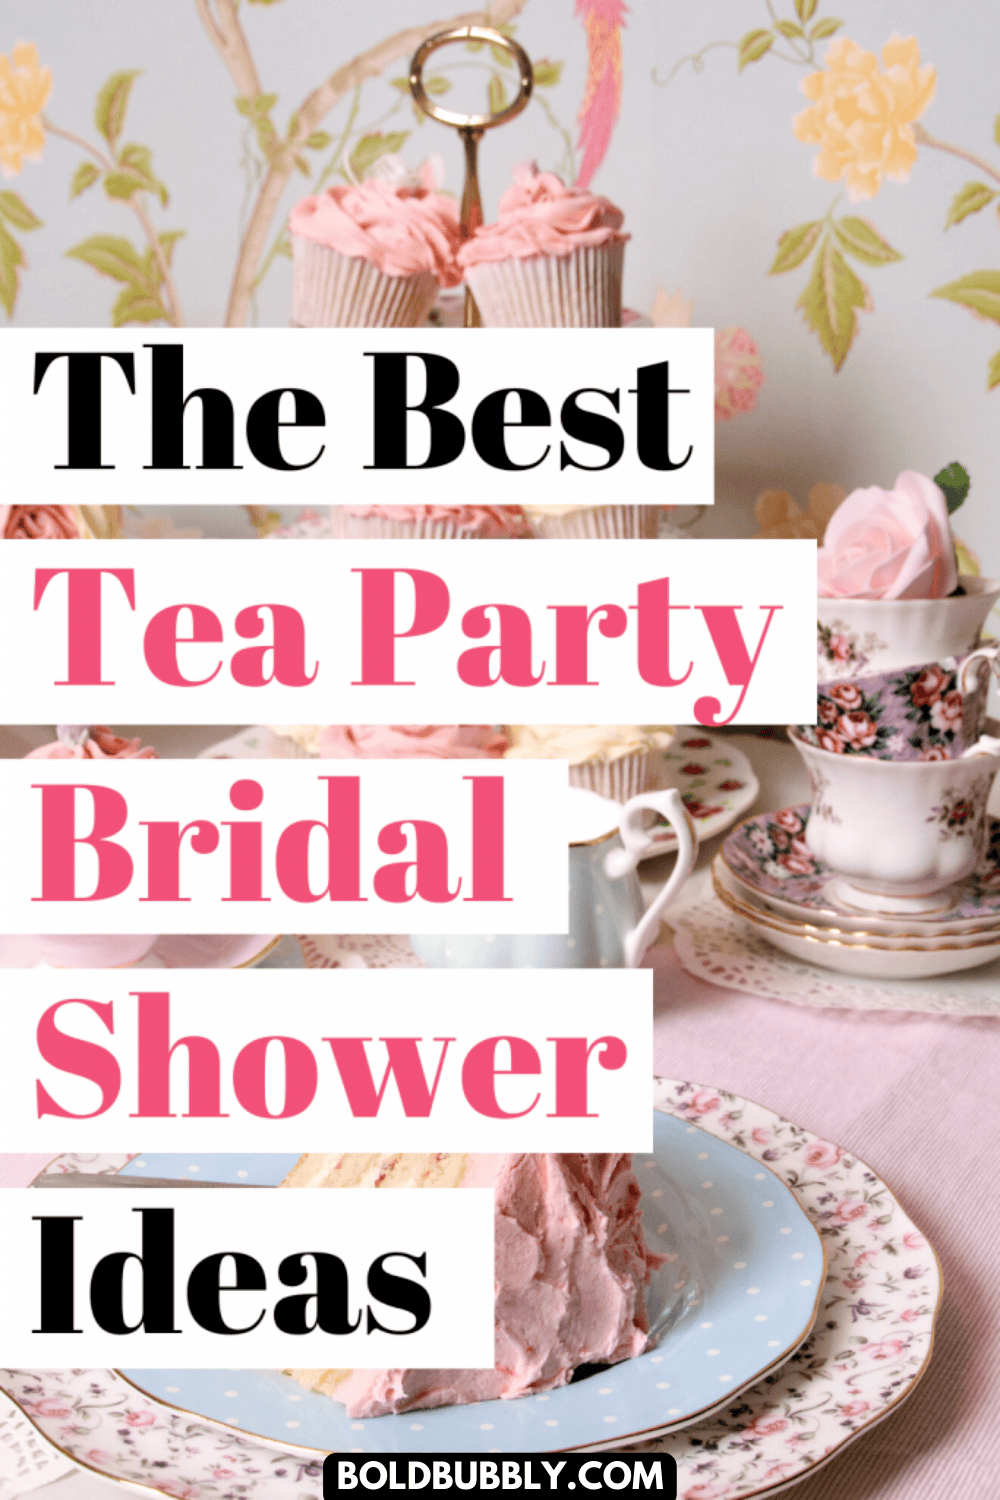 16 Of The Best Tea Party Bridal Shower Ideas - Bold & Bubbly